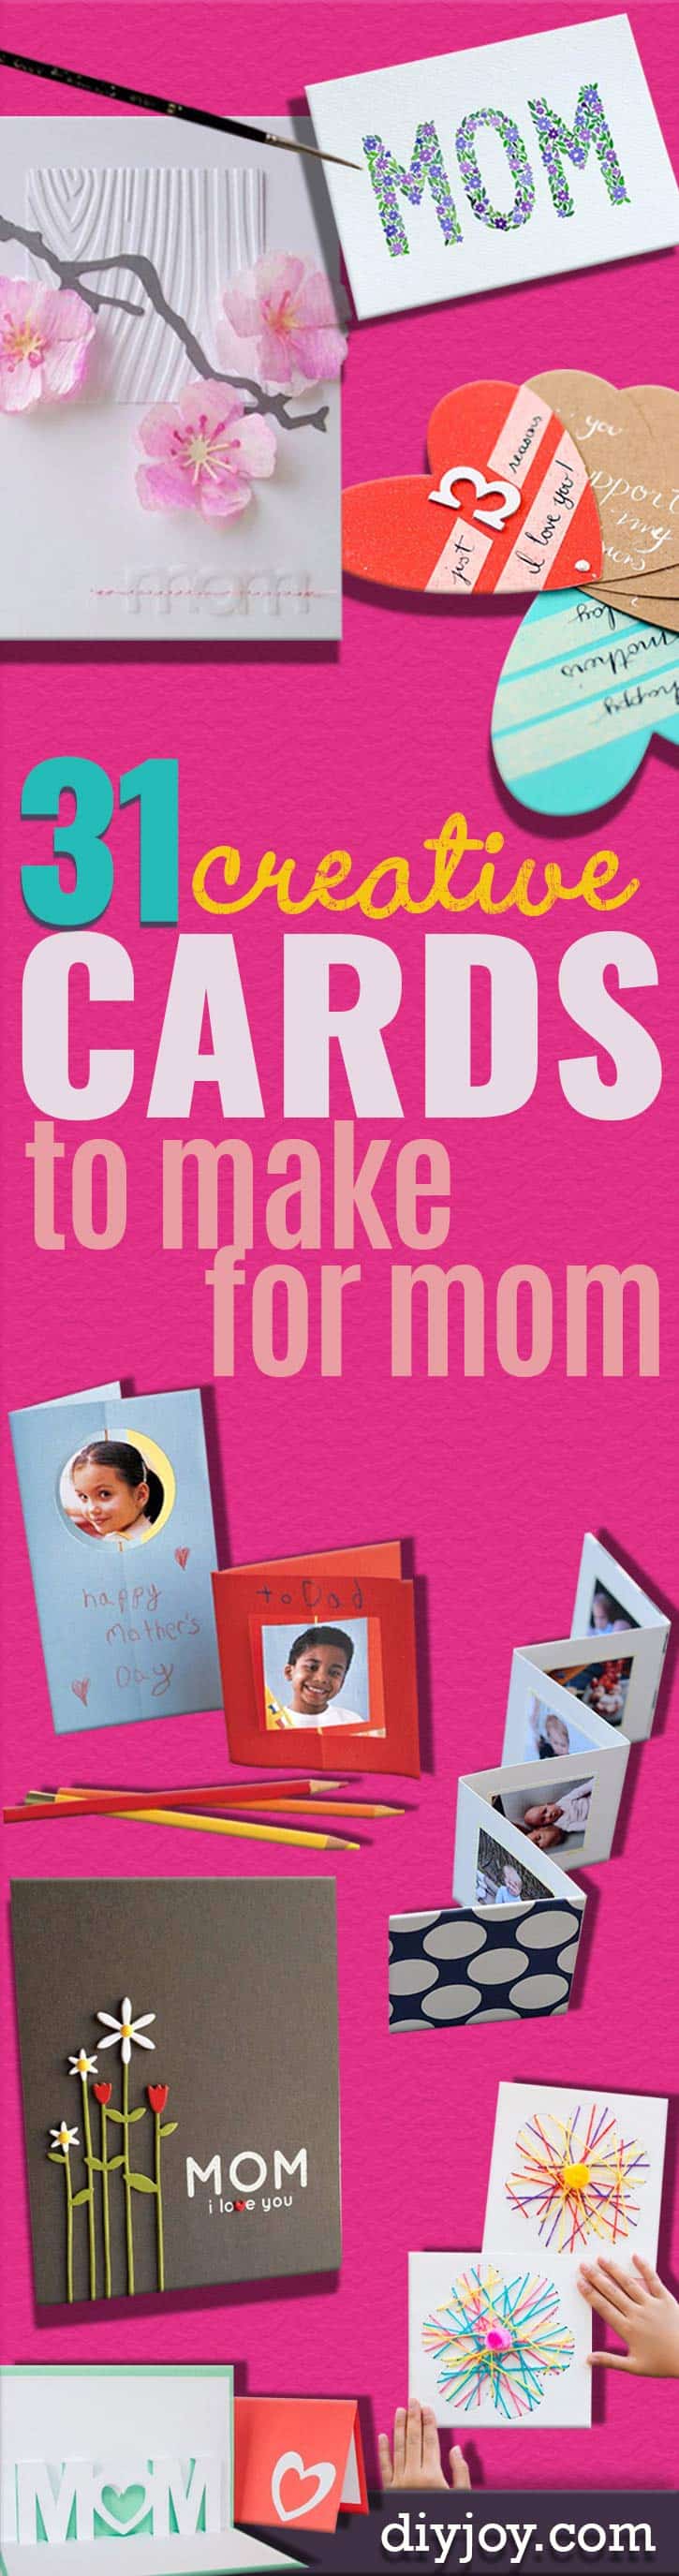 DIY Mothers Day Cards -Creative and Thoughtful Homemade Card Ideas for Mom - Step by Step Tutorials, Best Quotes, Handmade Projects